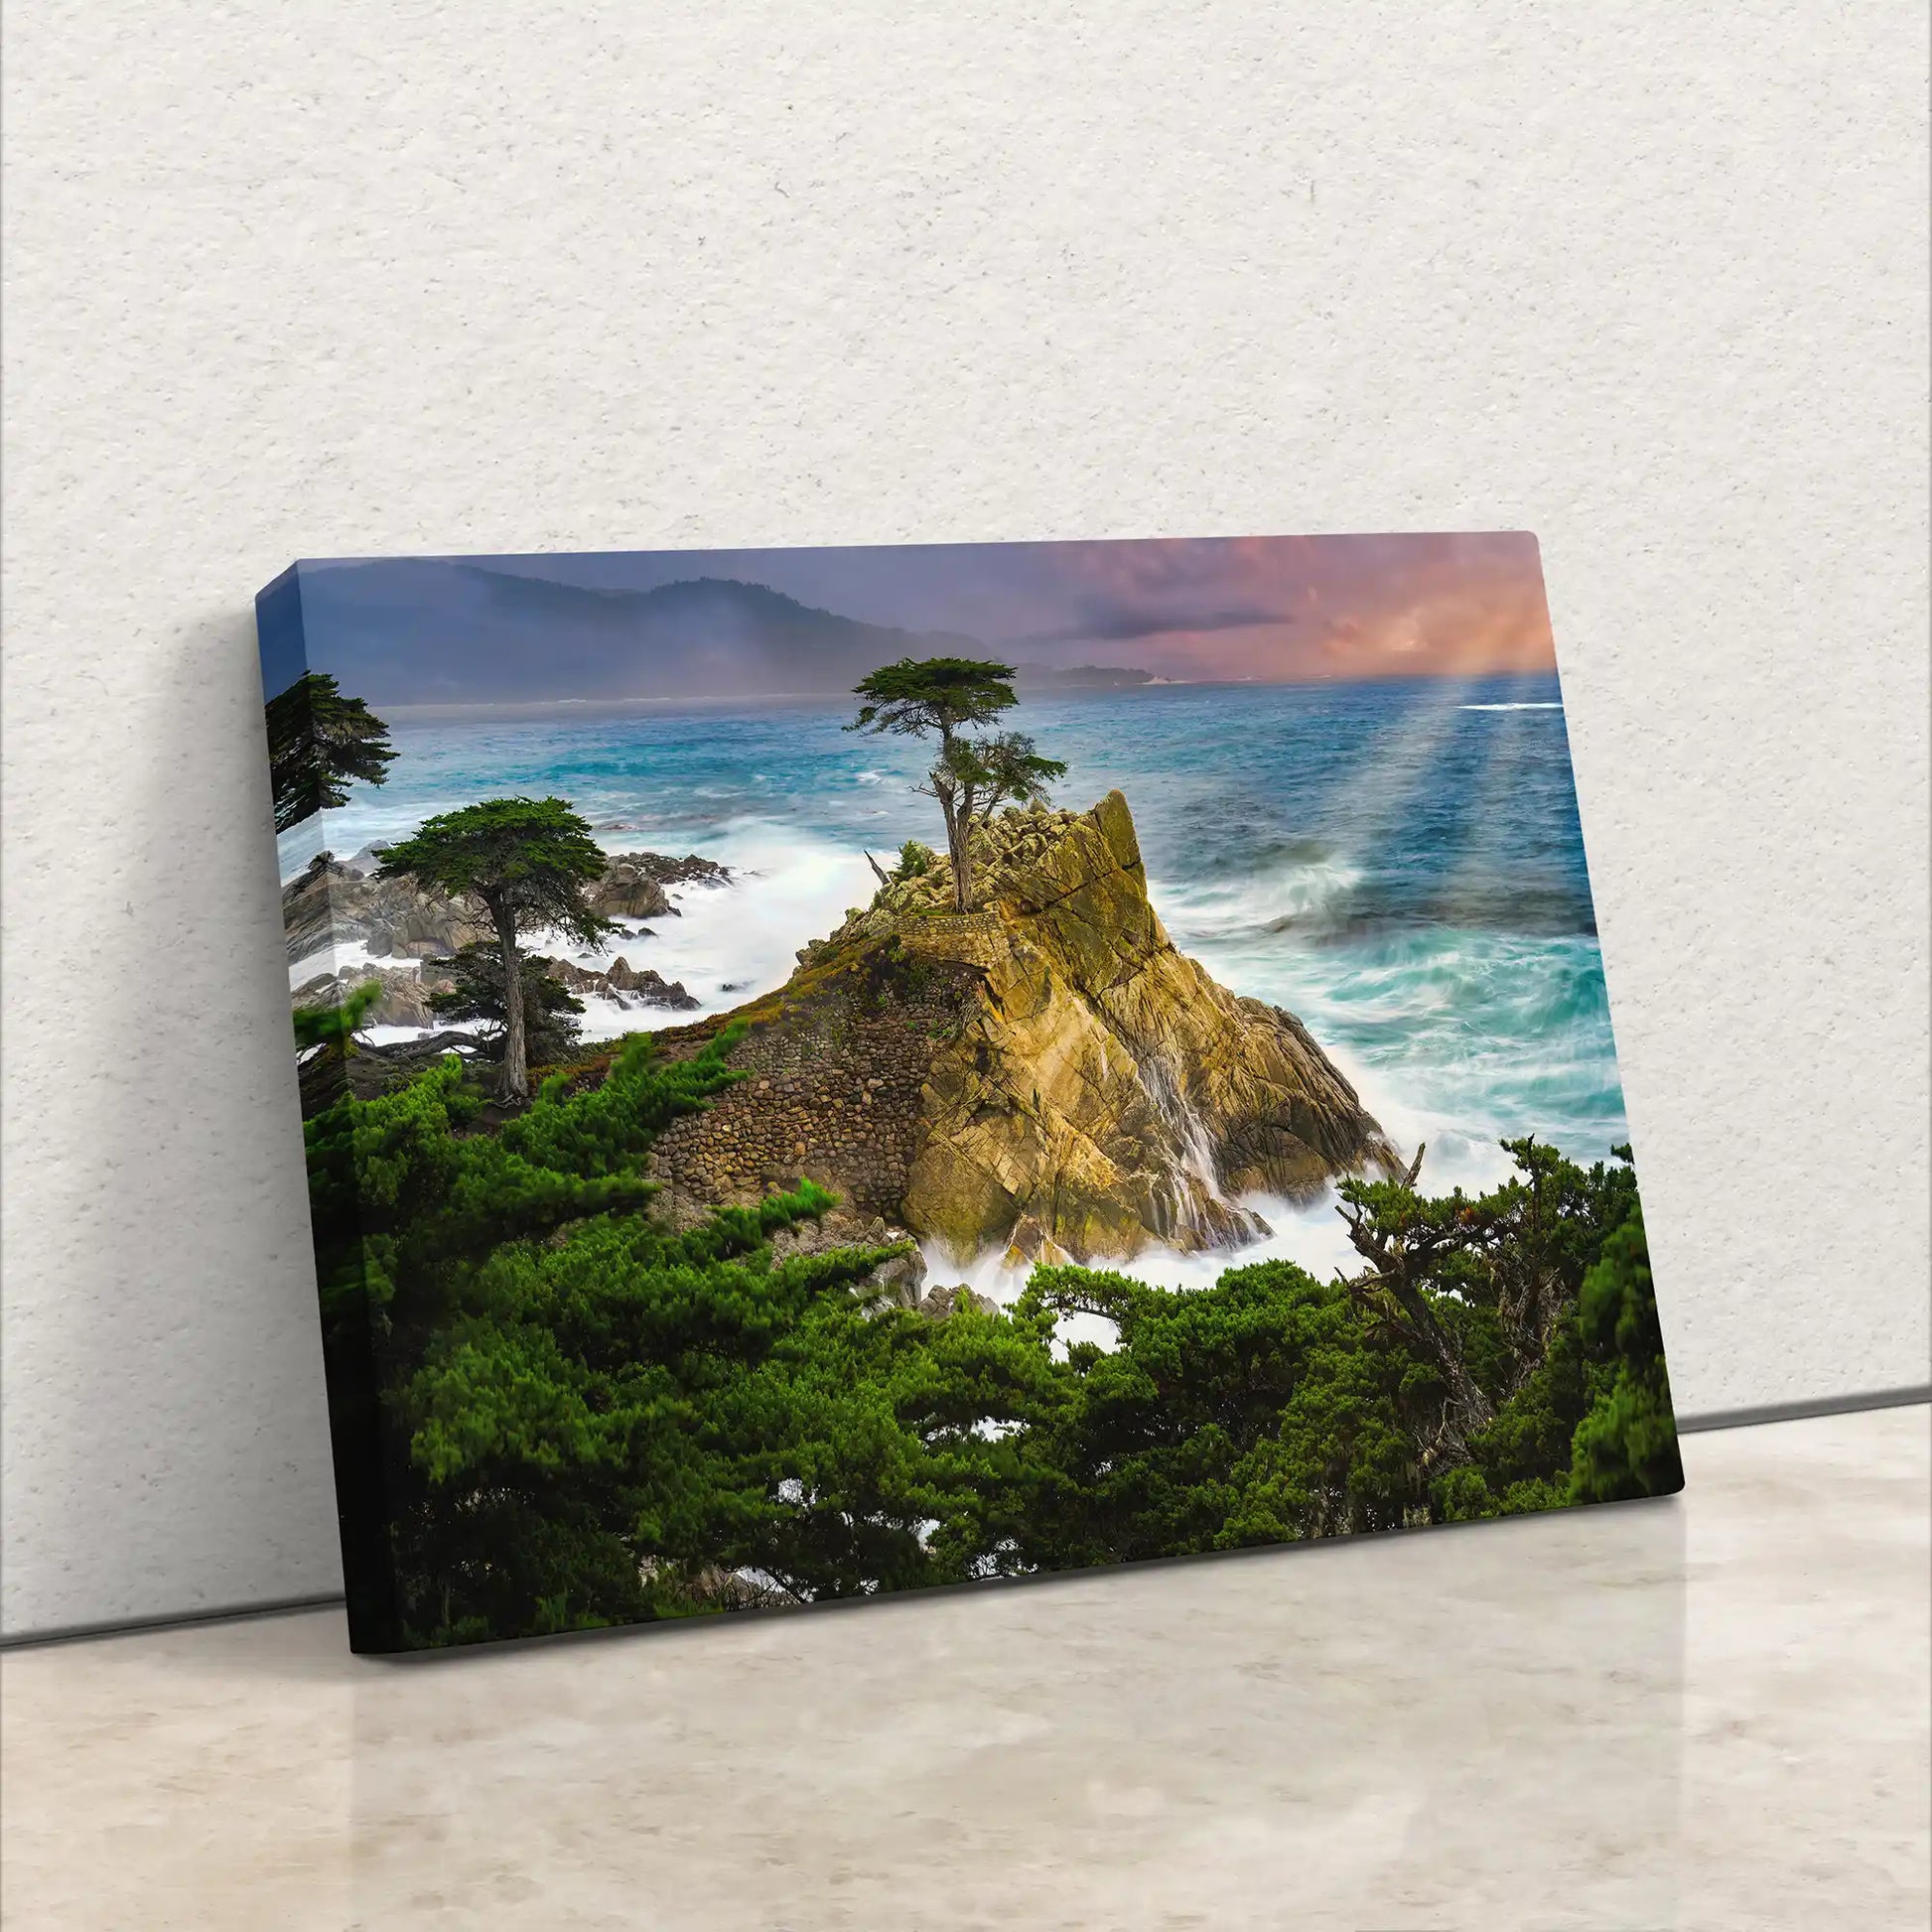 Lone Cypress Wall Decoration leaning against a wall